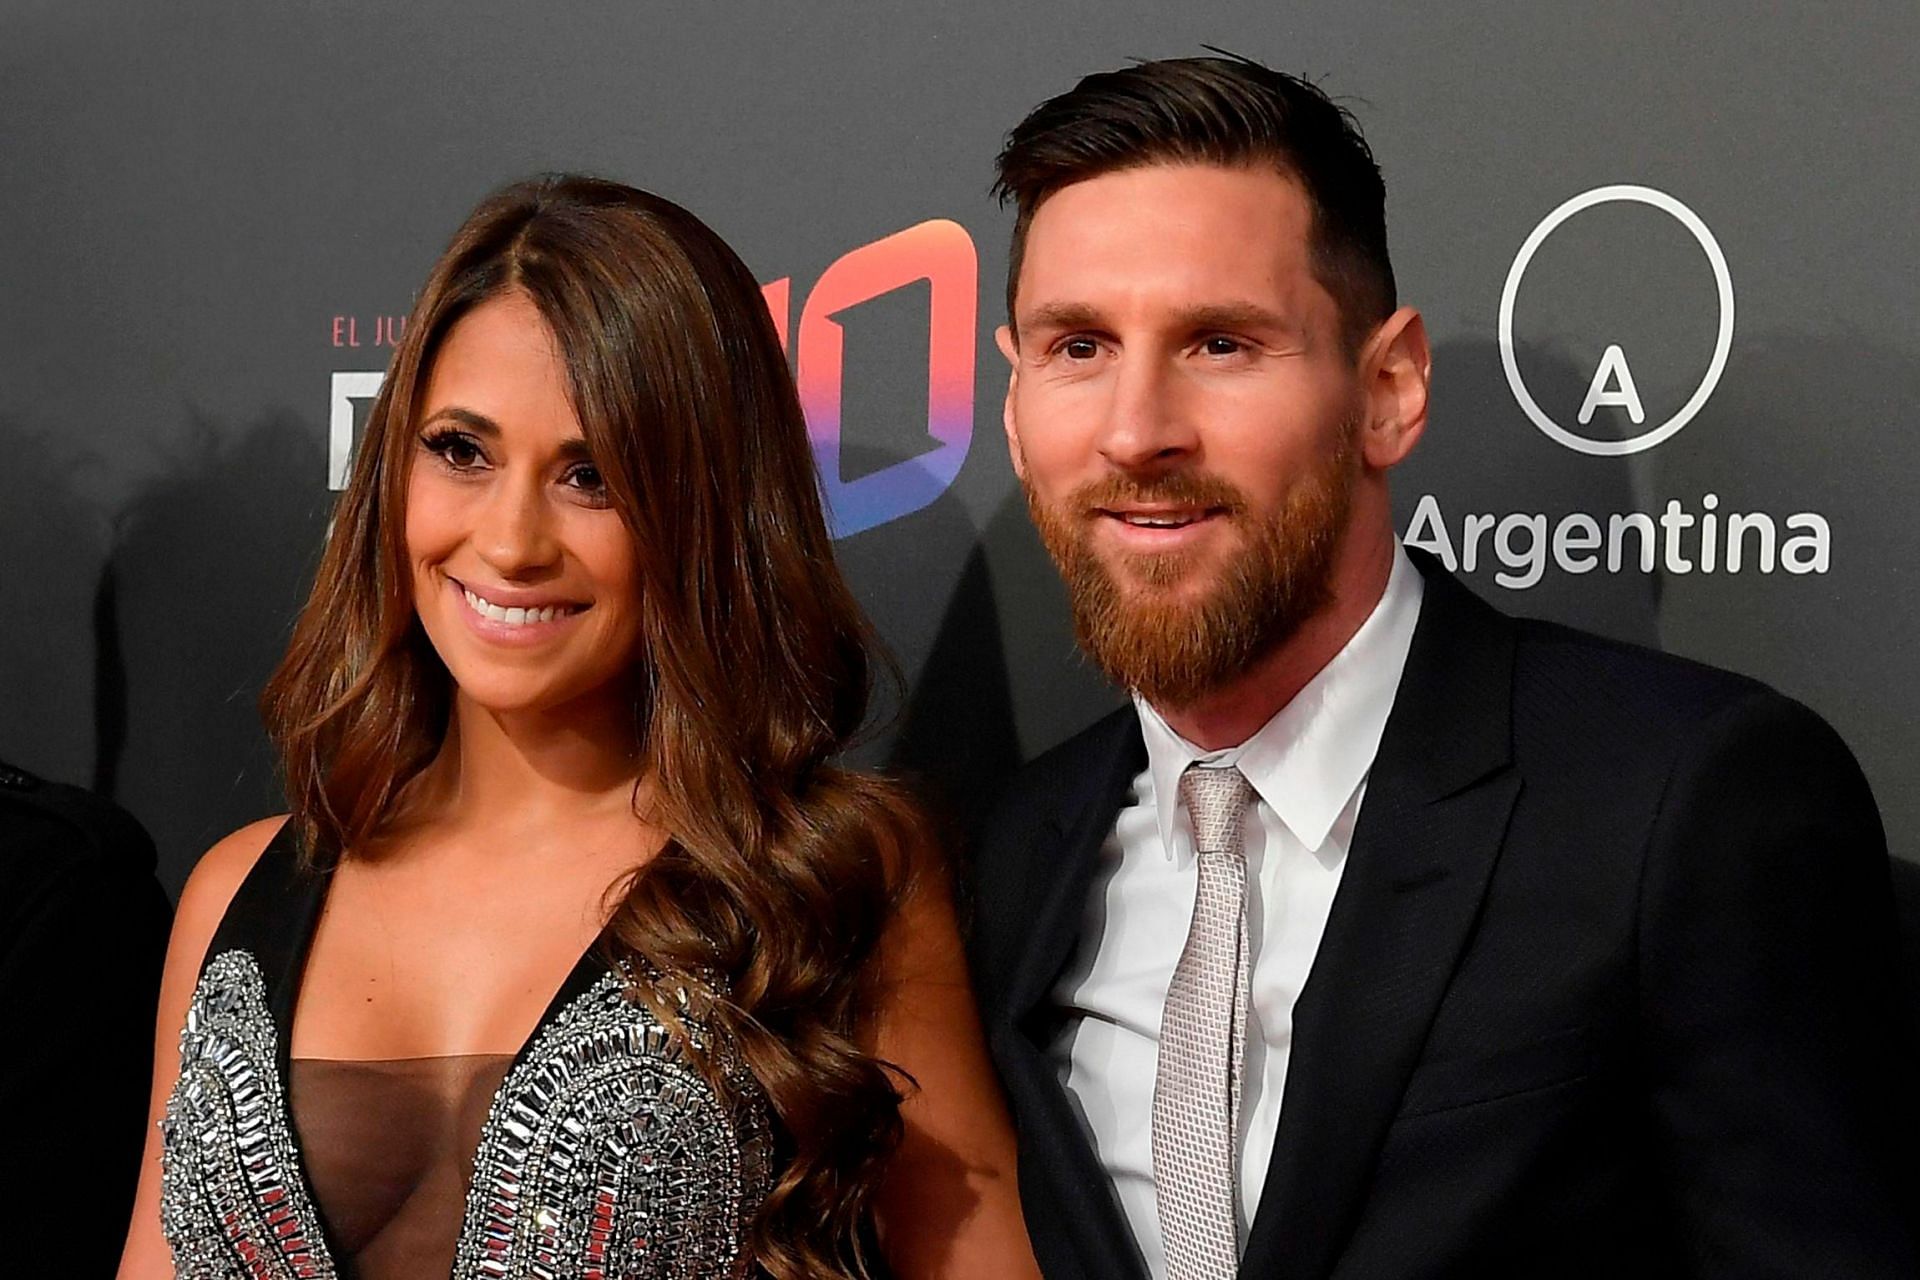 Messi is deservedly the highest paid footballer in the world